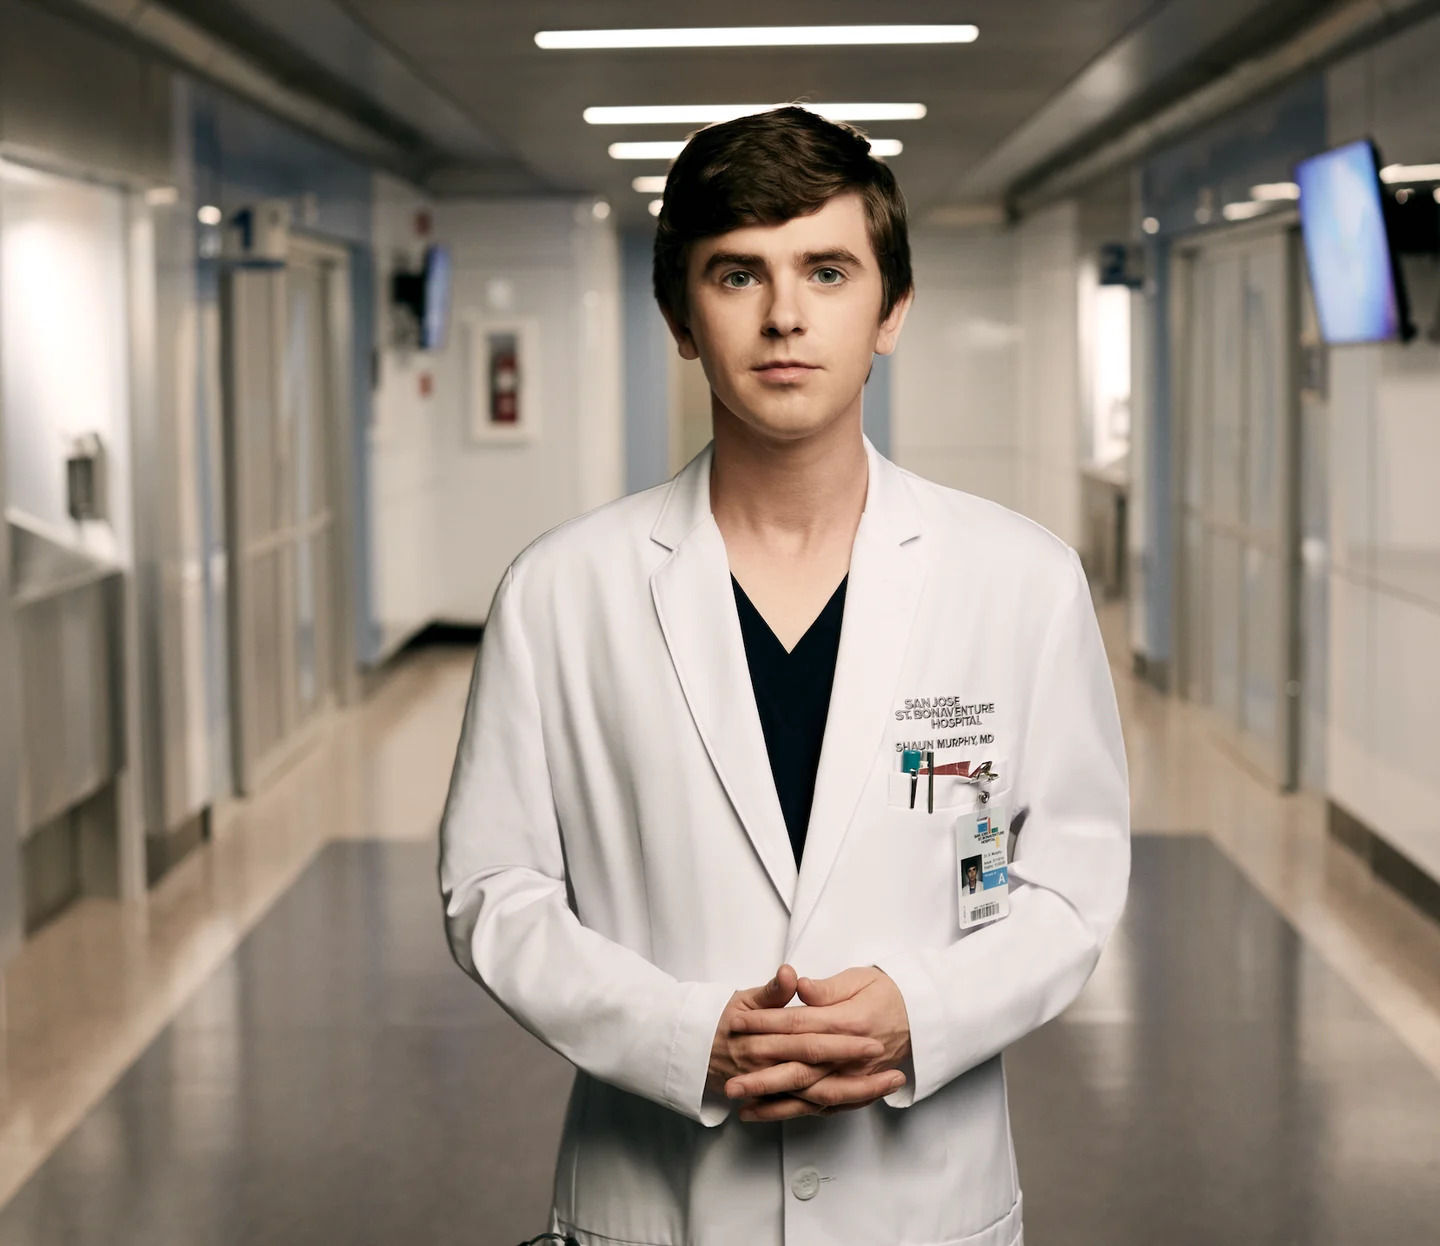 is the good doctor on tonight new episodes coming back